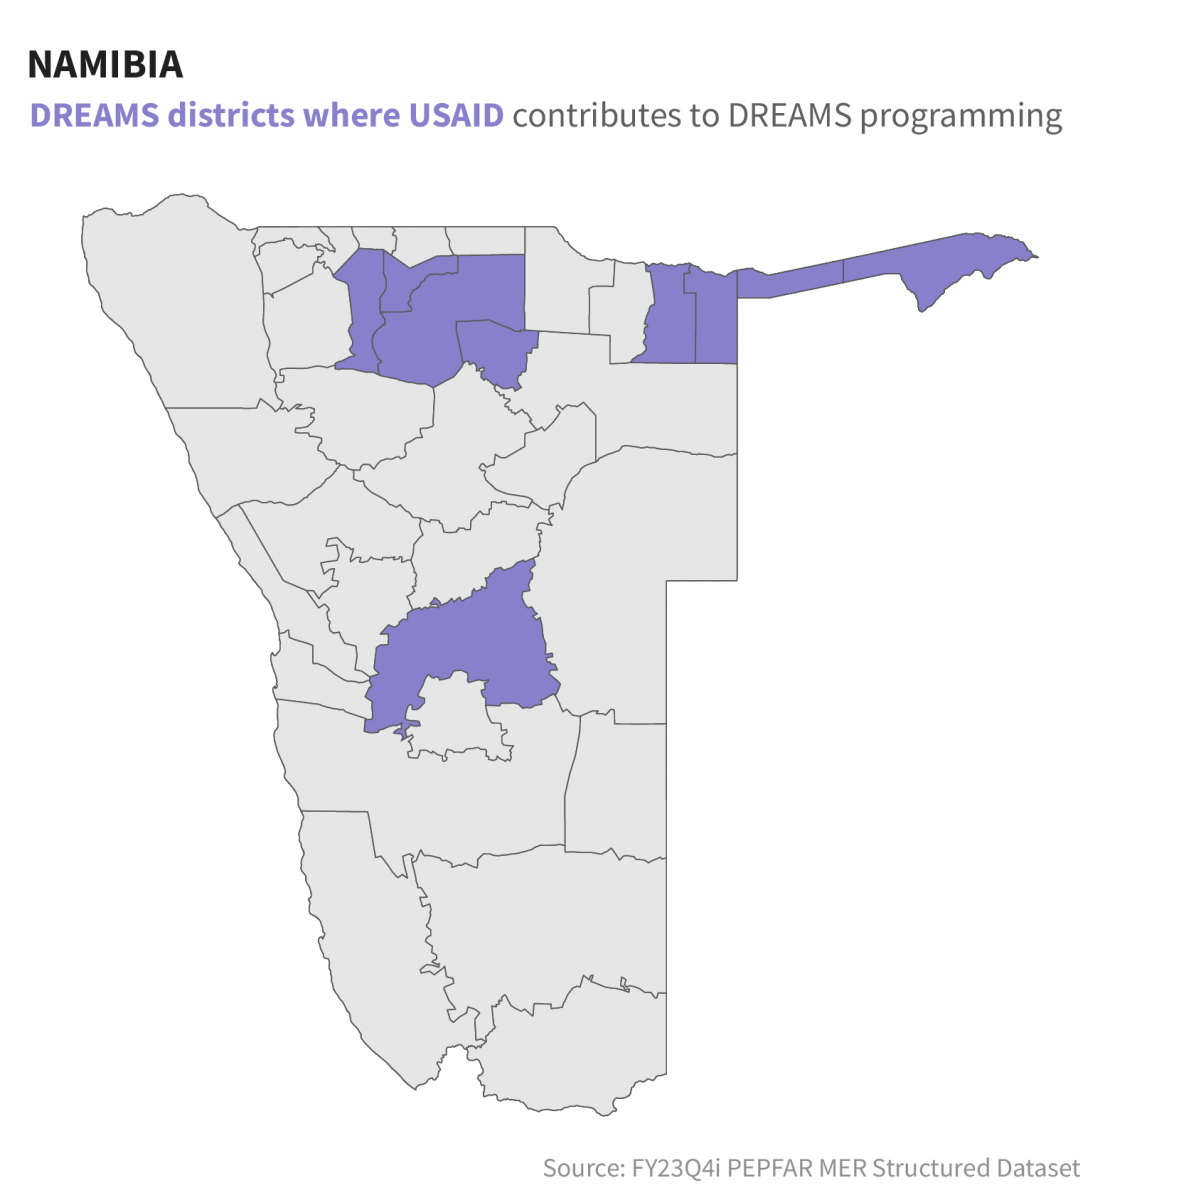 Namibia: DREAMS districts where USAID contributes to DREAMS programming